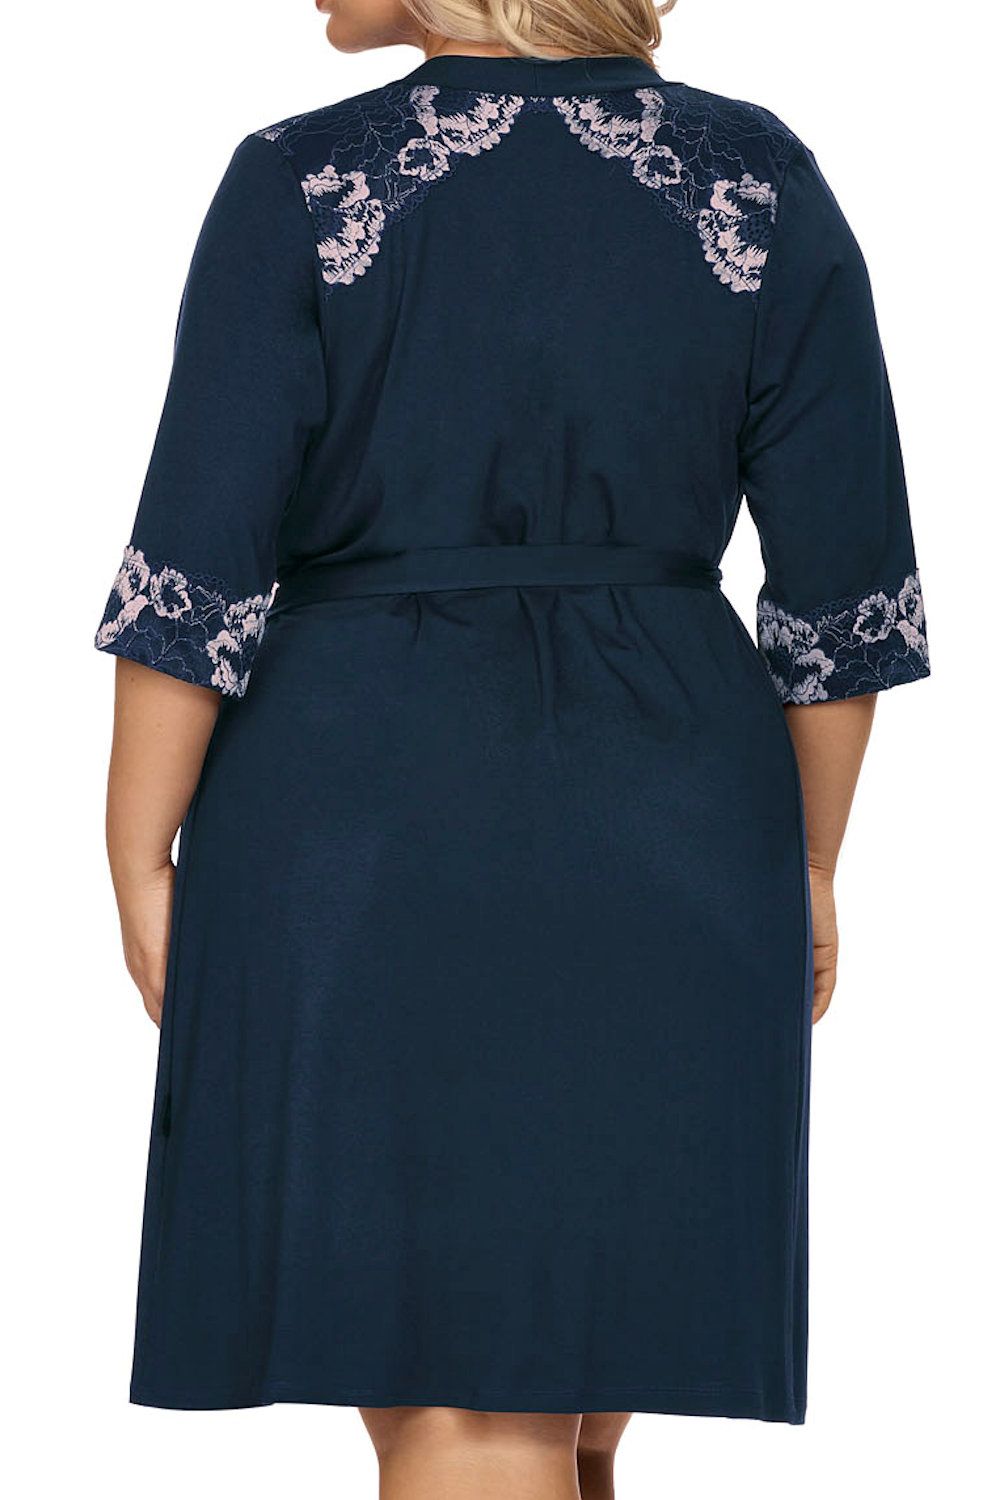 Helen Dressing Gown Navy  Lumingerie bras and underwear for big busts